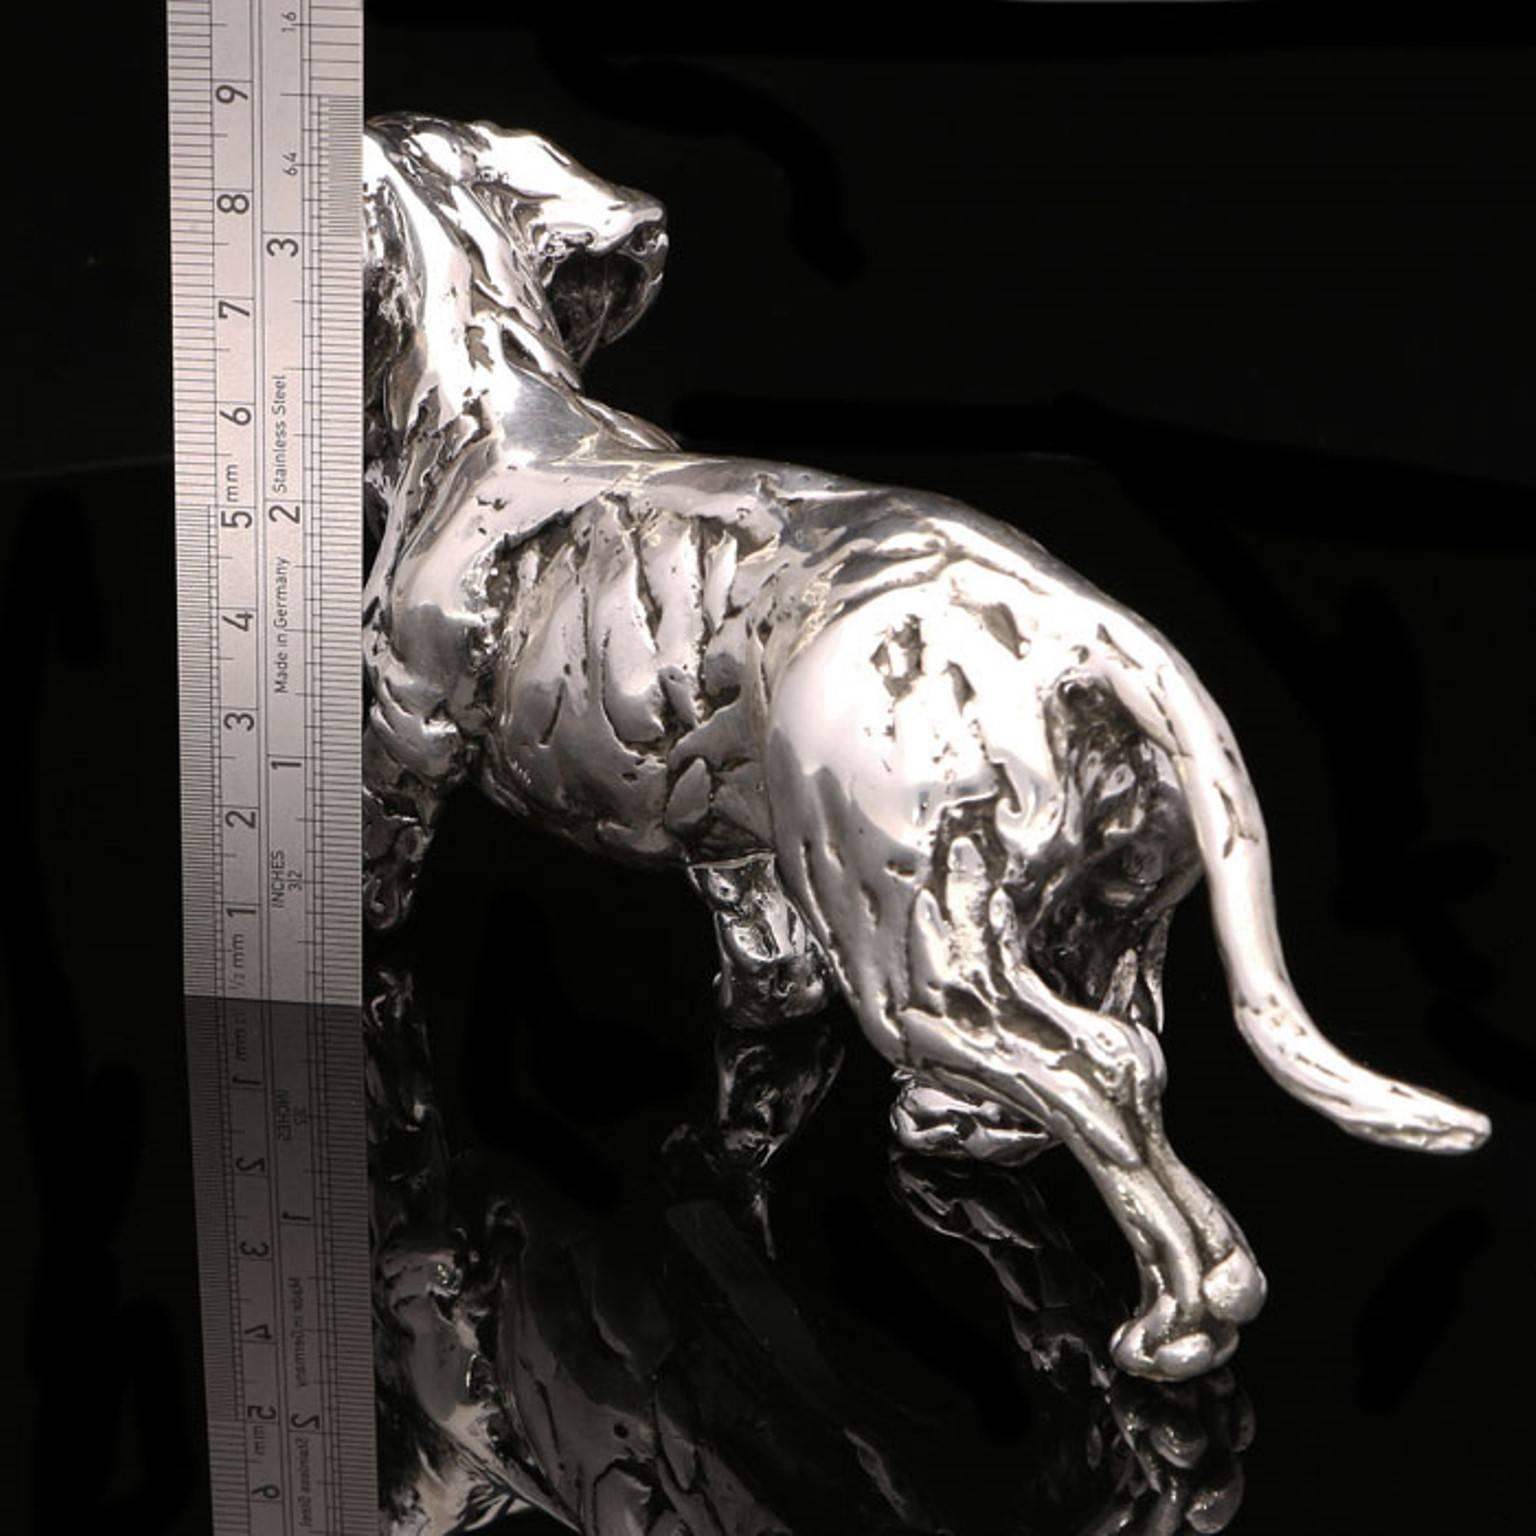 Lucy Kinsella ‘Dachshund’ sterling silver sculpture 2